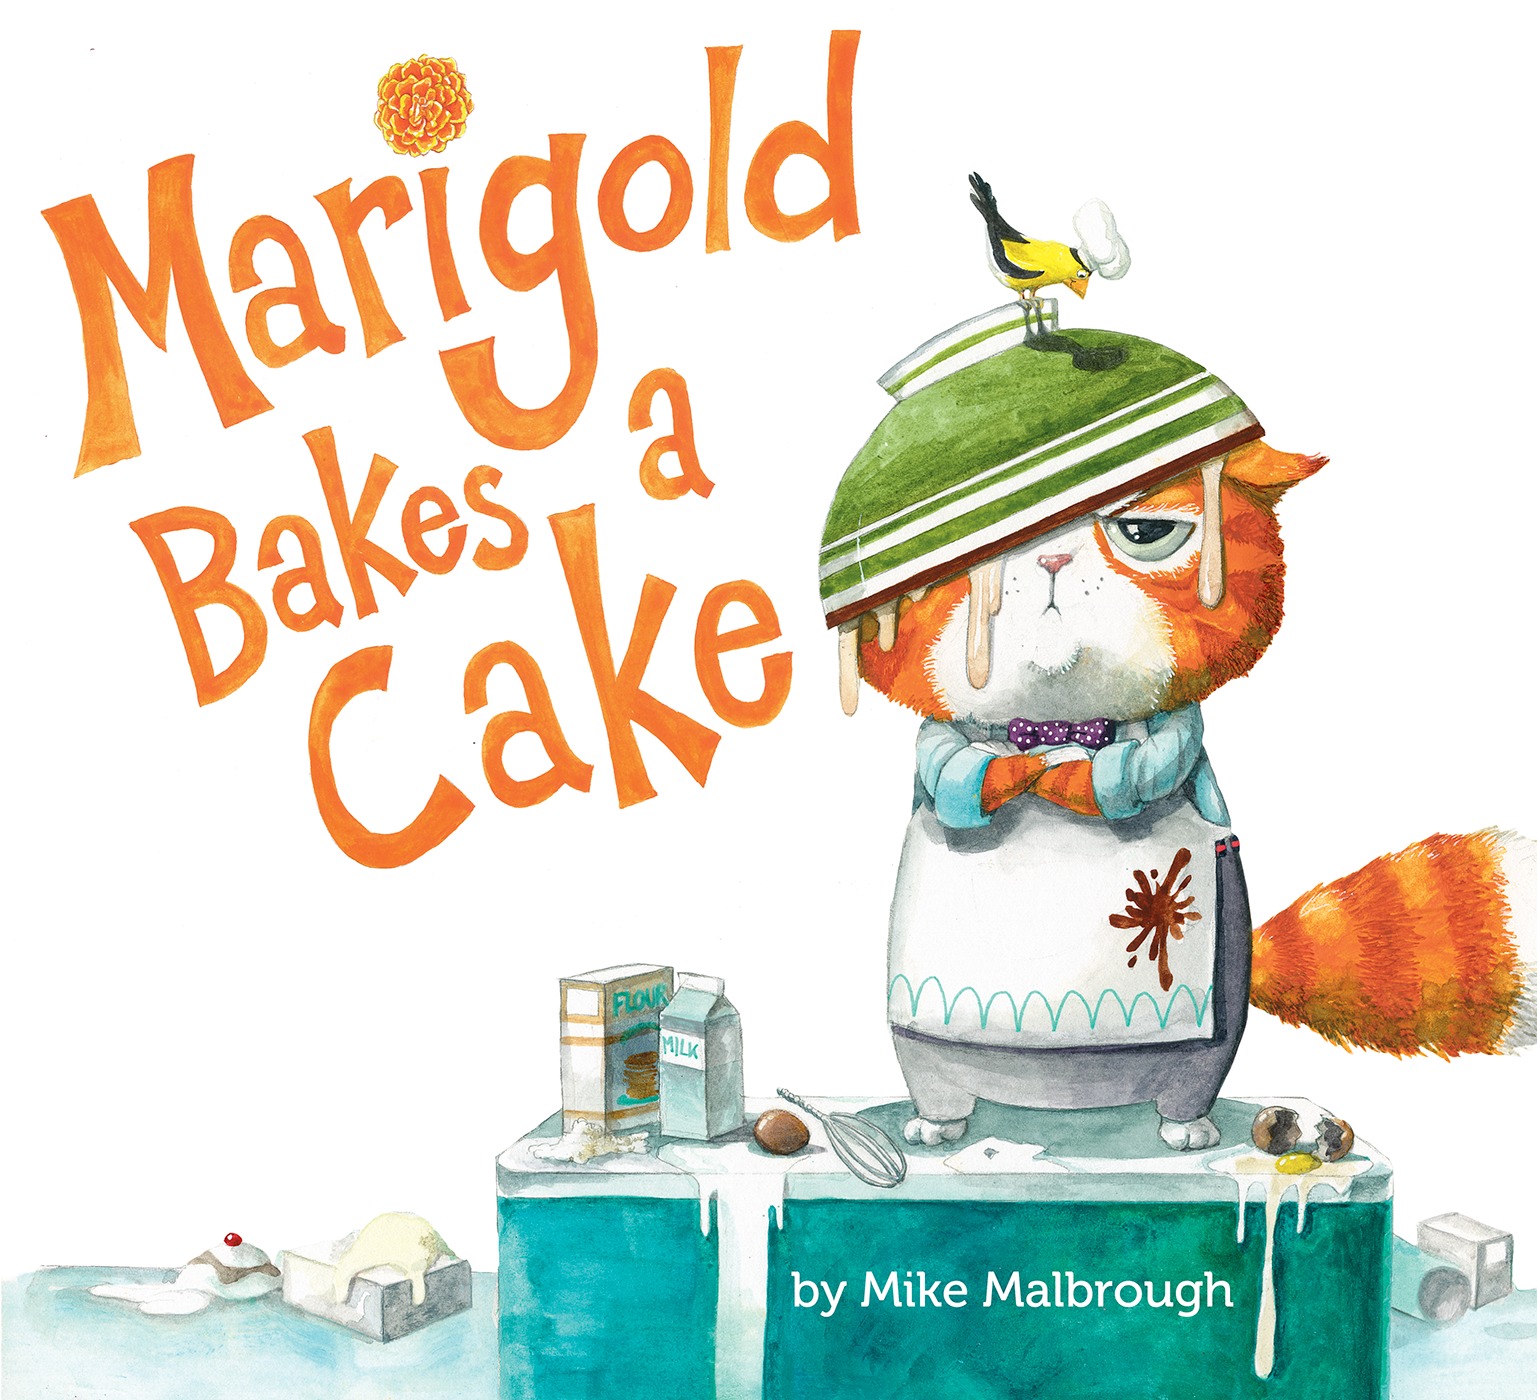 Sunday Story Time with Mike Malbrough (Author & Illustrator of Marigold Bakes a Cake)